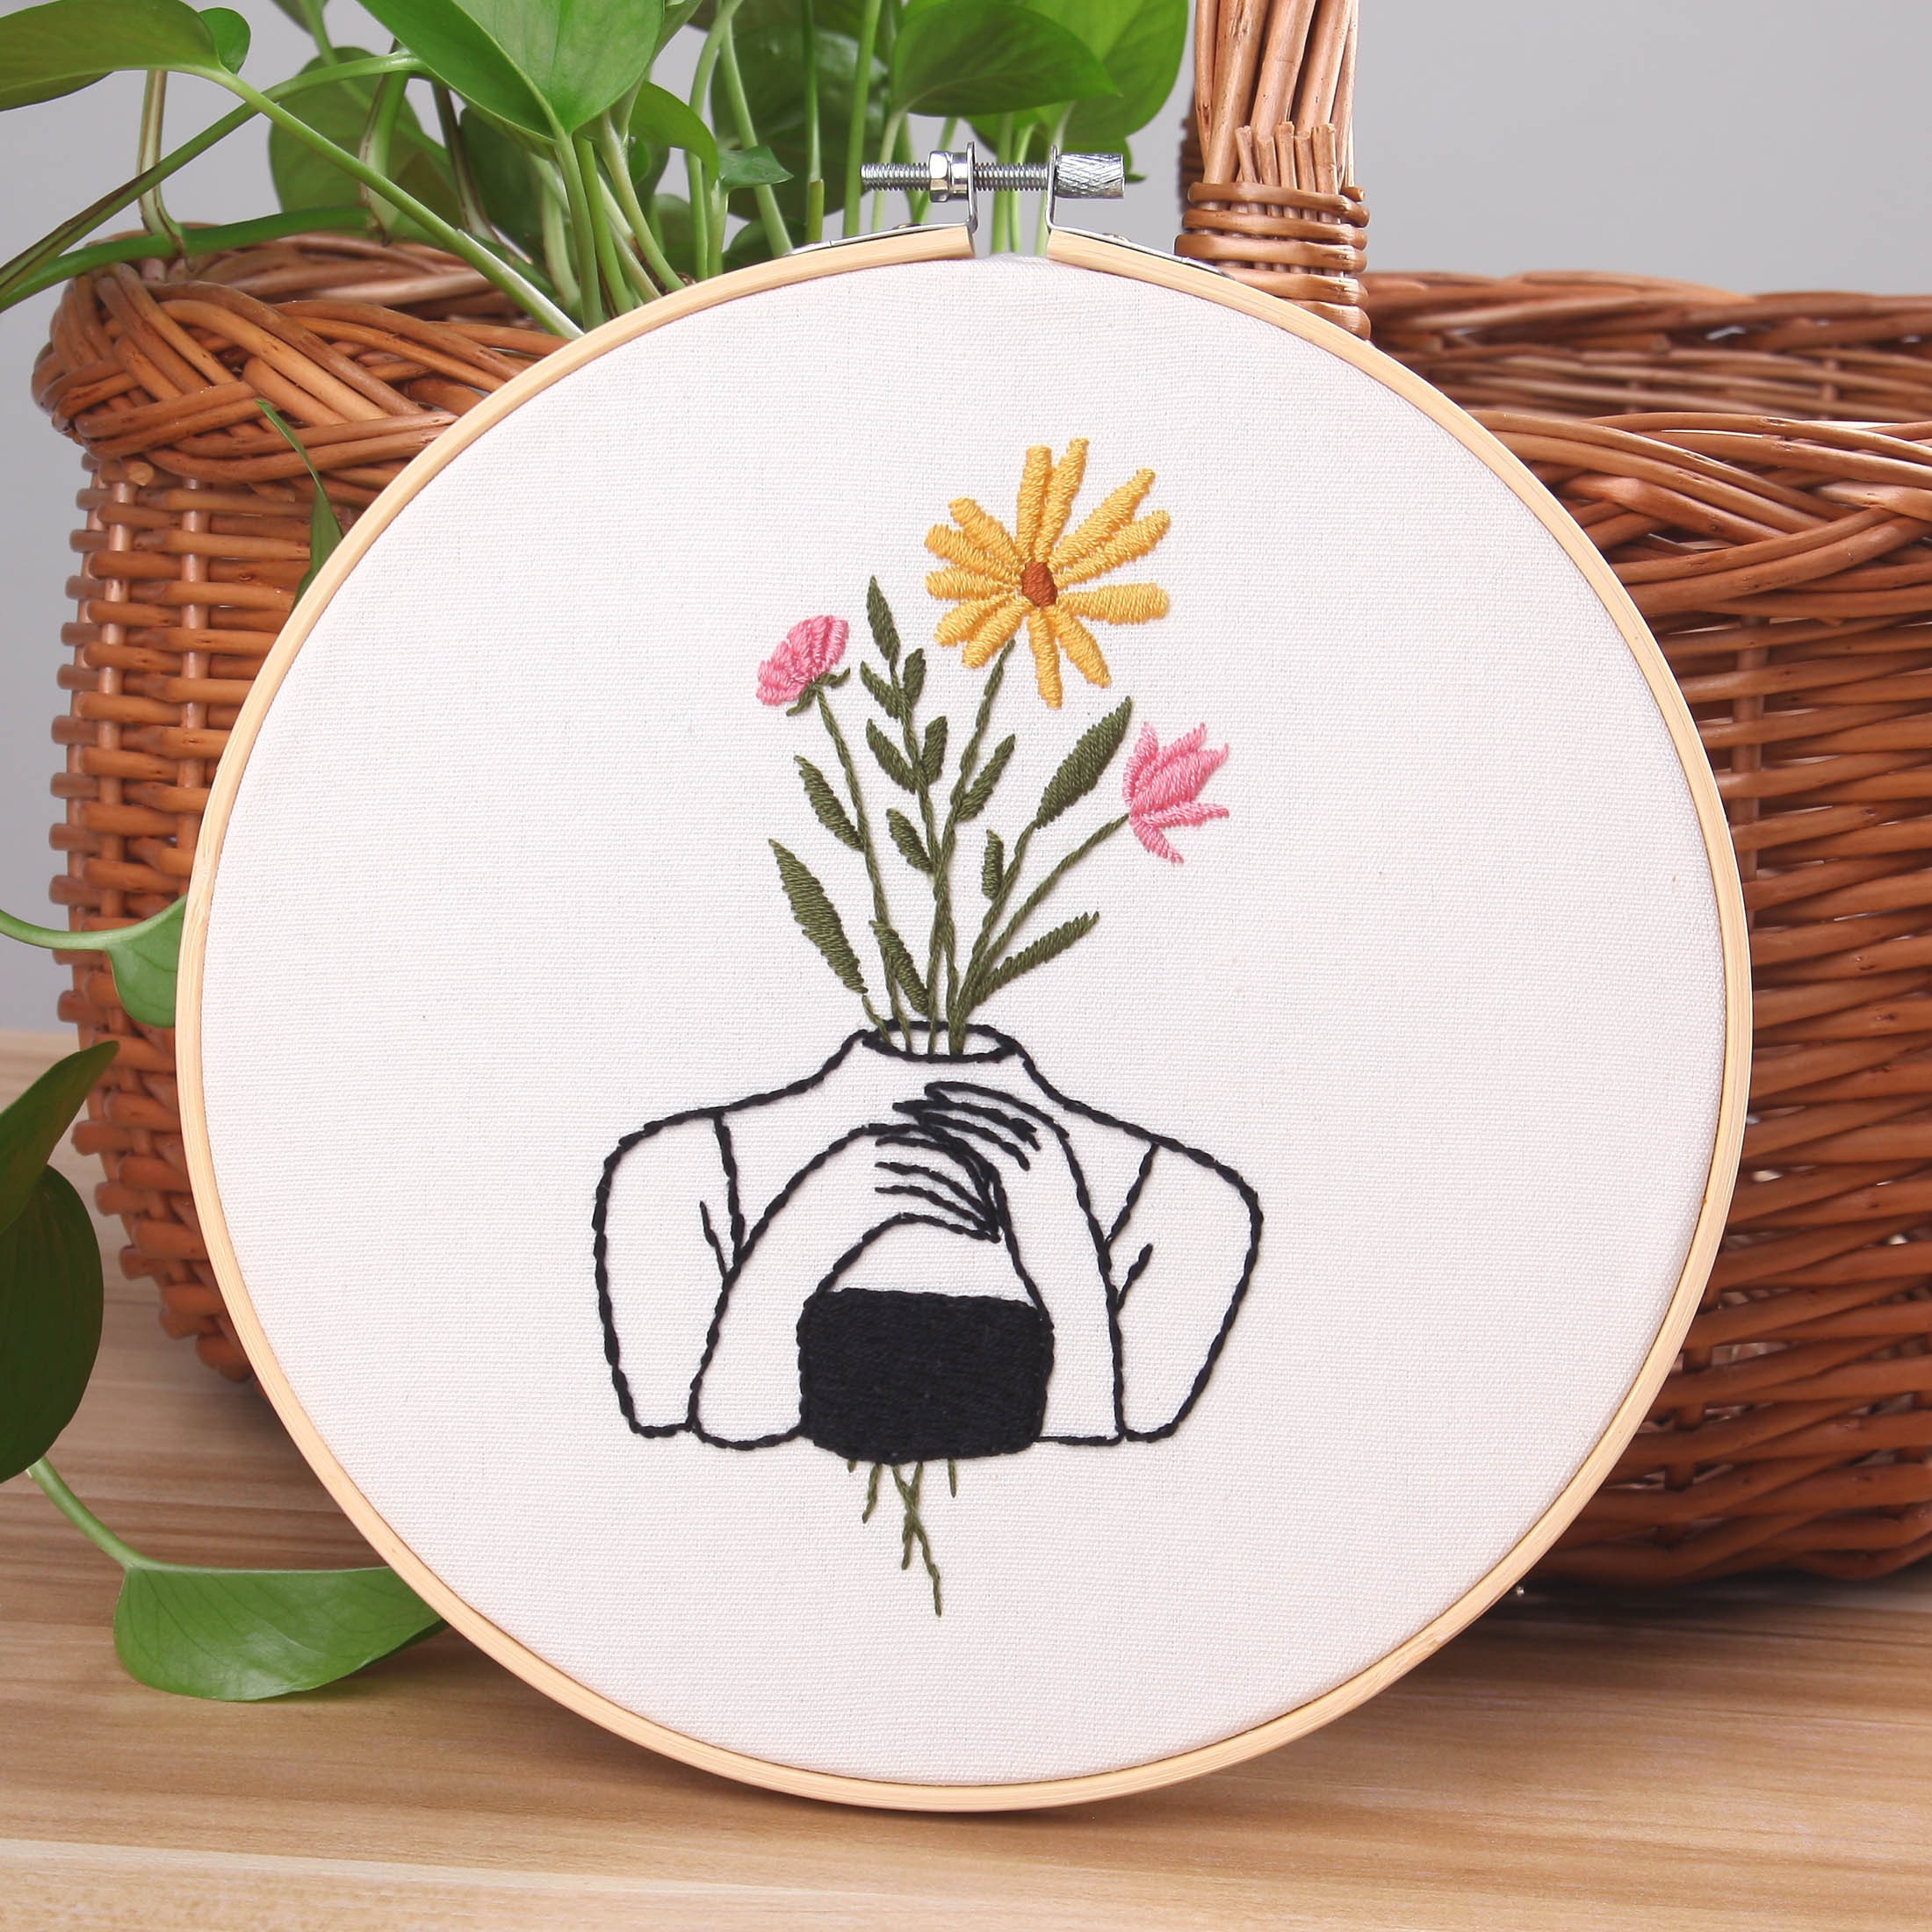 Embroidery Kit Beginner Flower Diy, Embroidery Kit Modern Plants, Diy Kit  Embroidery Gift, Diy Kit Adult Kids, Gift for Mom 